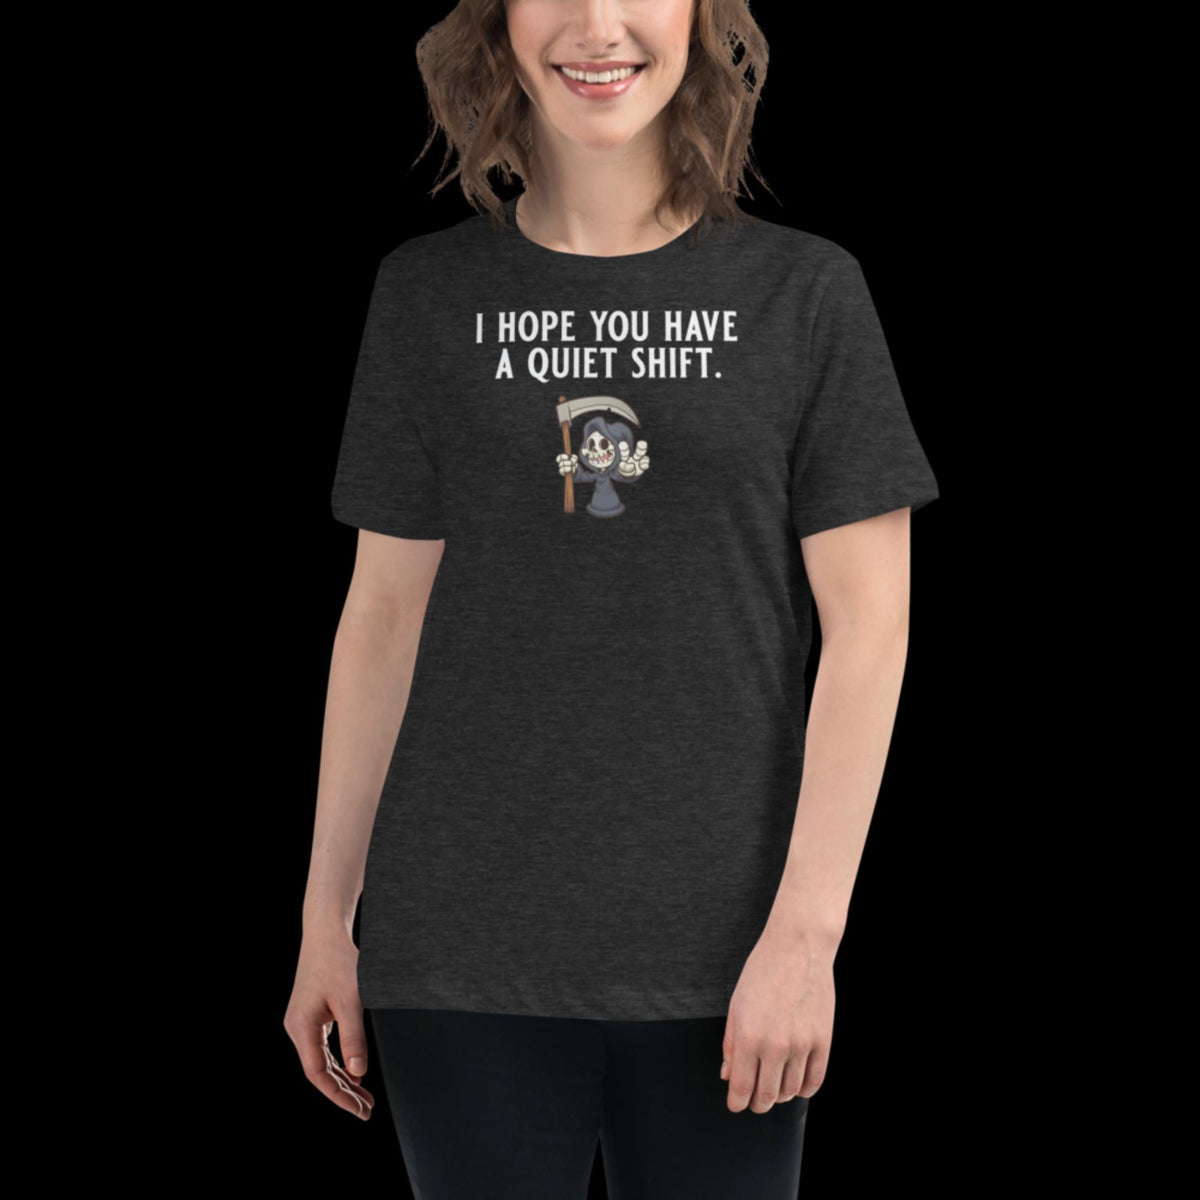 I hope you have a quiet shift Women's Relaxed T-Shirt - Salty Medic Clothing Co.